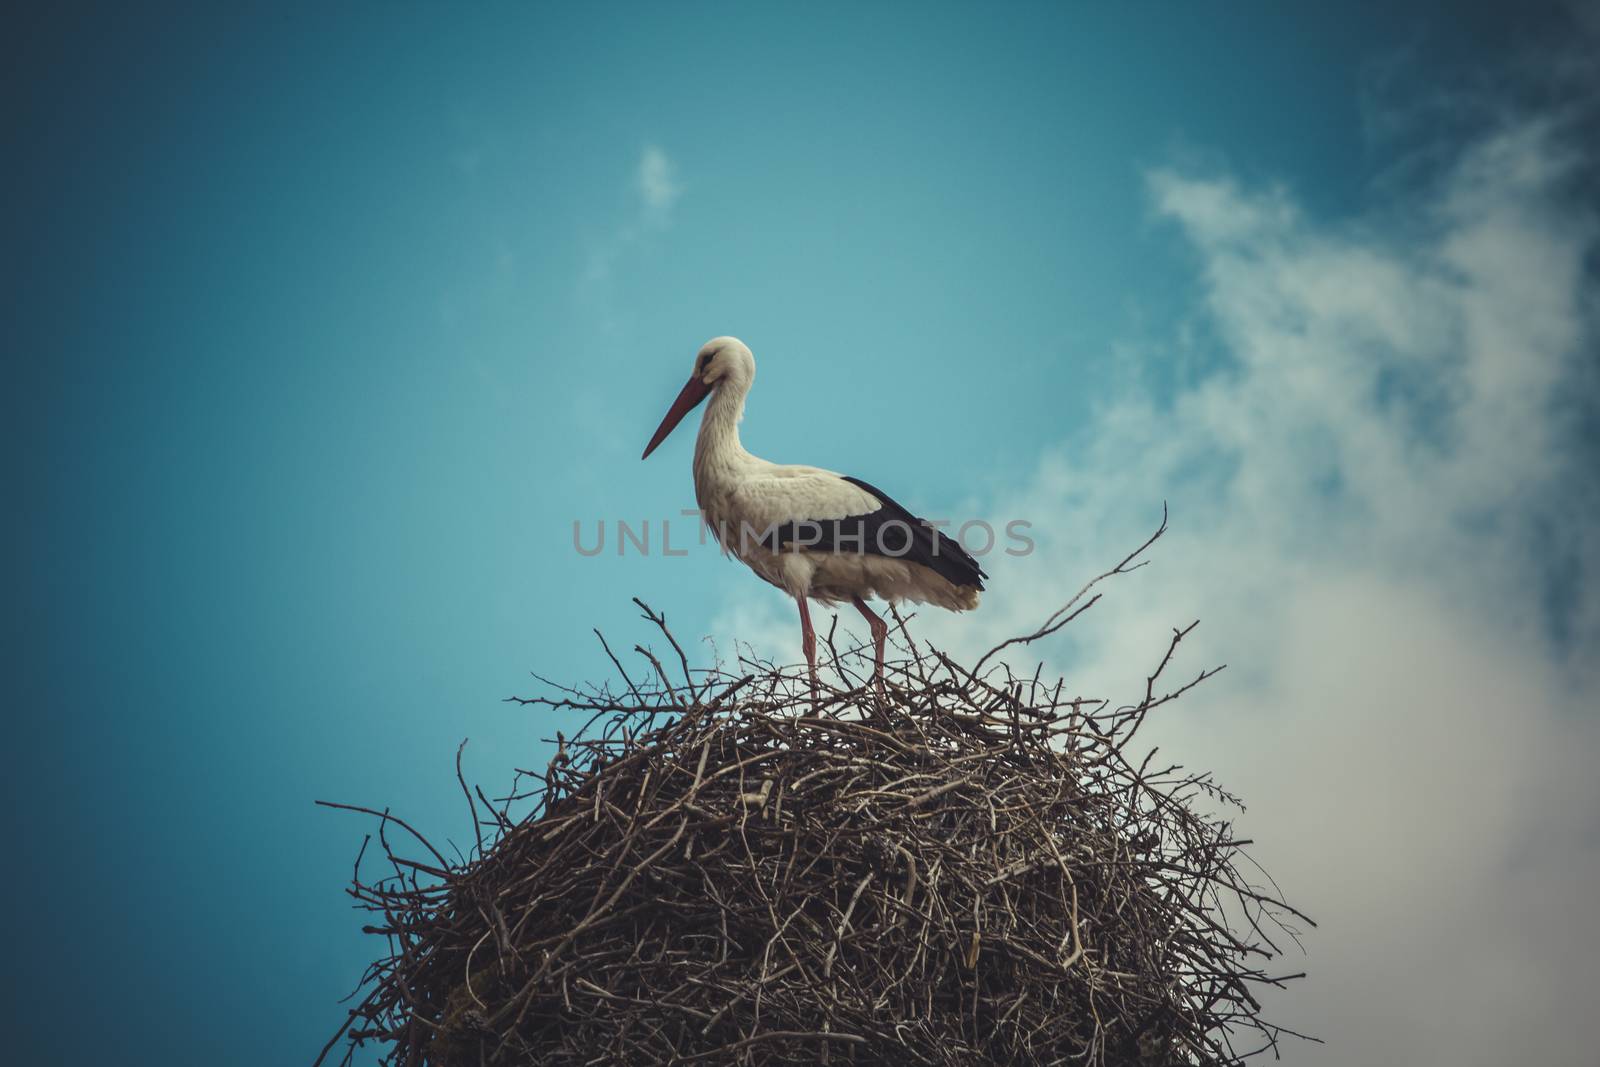 Wildlife, Stork nest made ������of tree branches over blue sky i by FernandoCortes